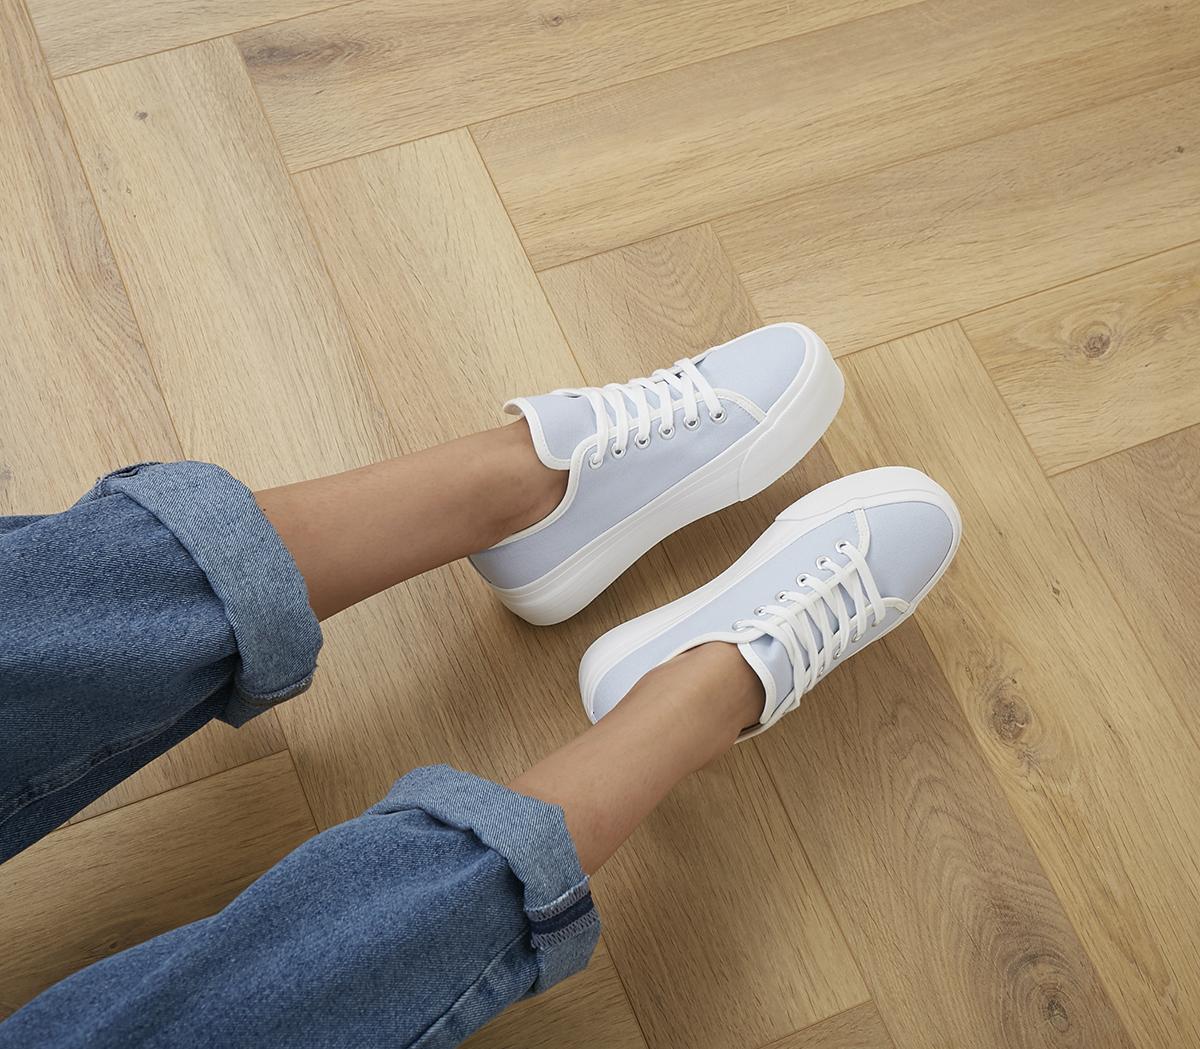 OFFICEFeeling Flatform Lace Up TrainersBlue Canvas